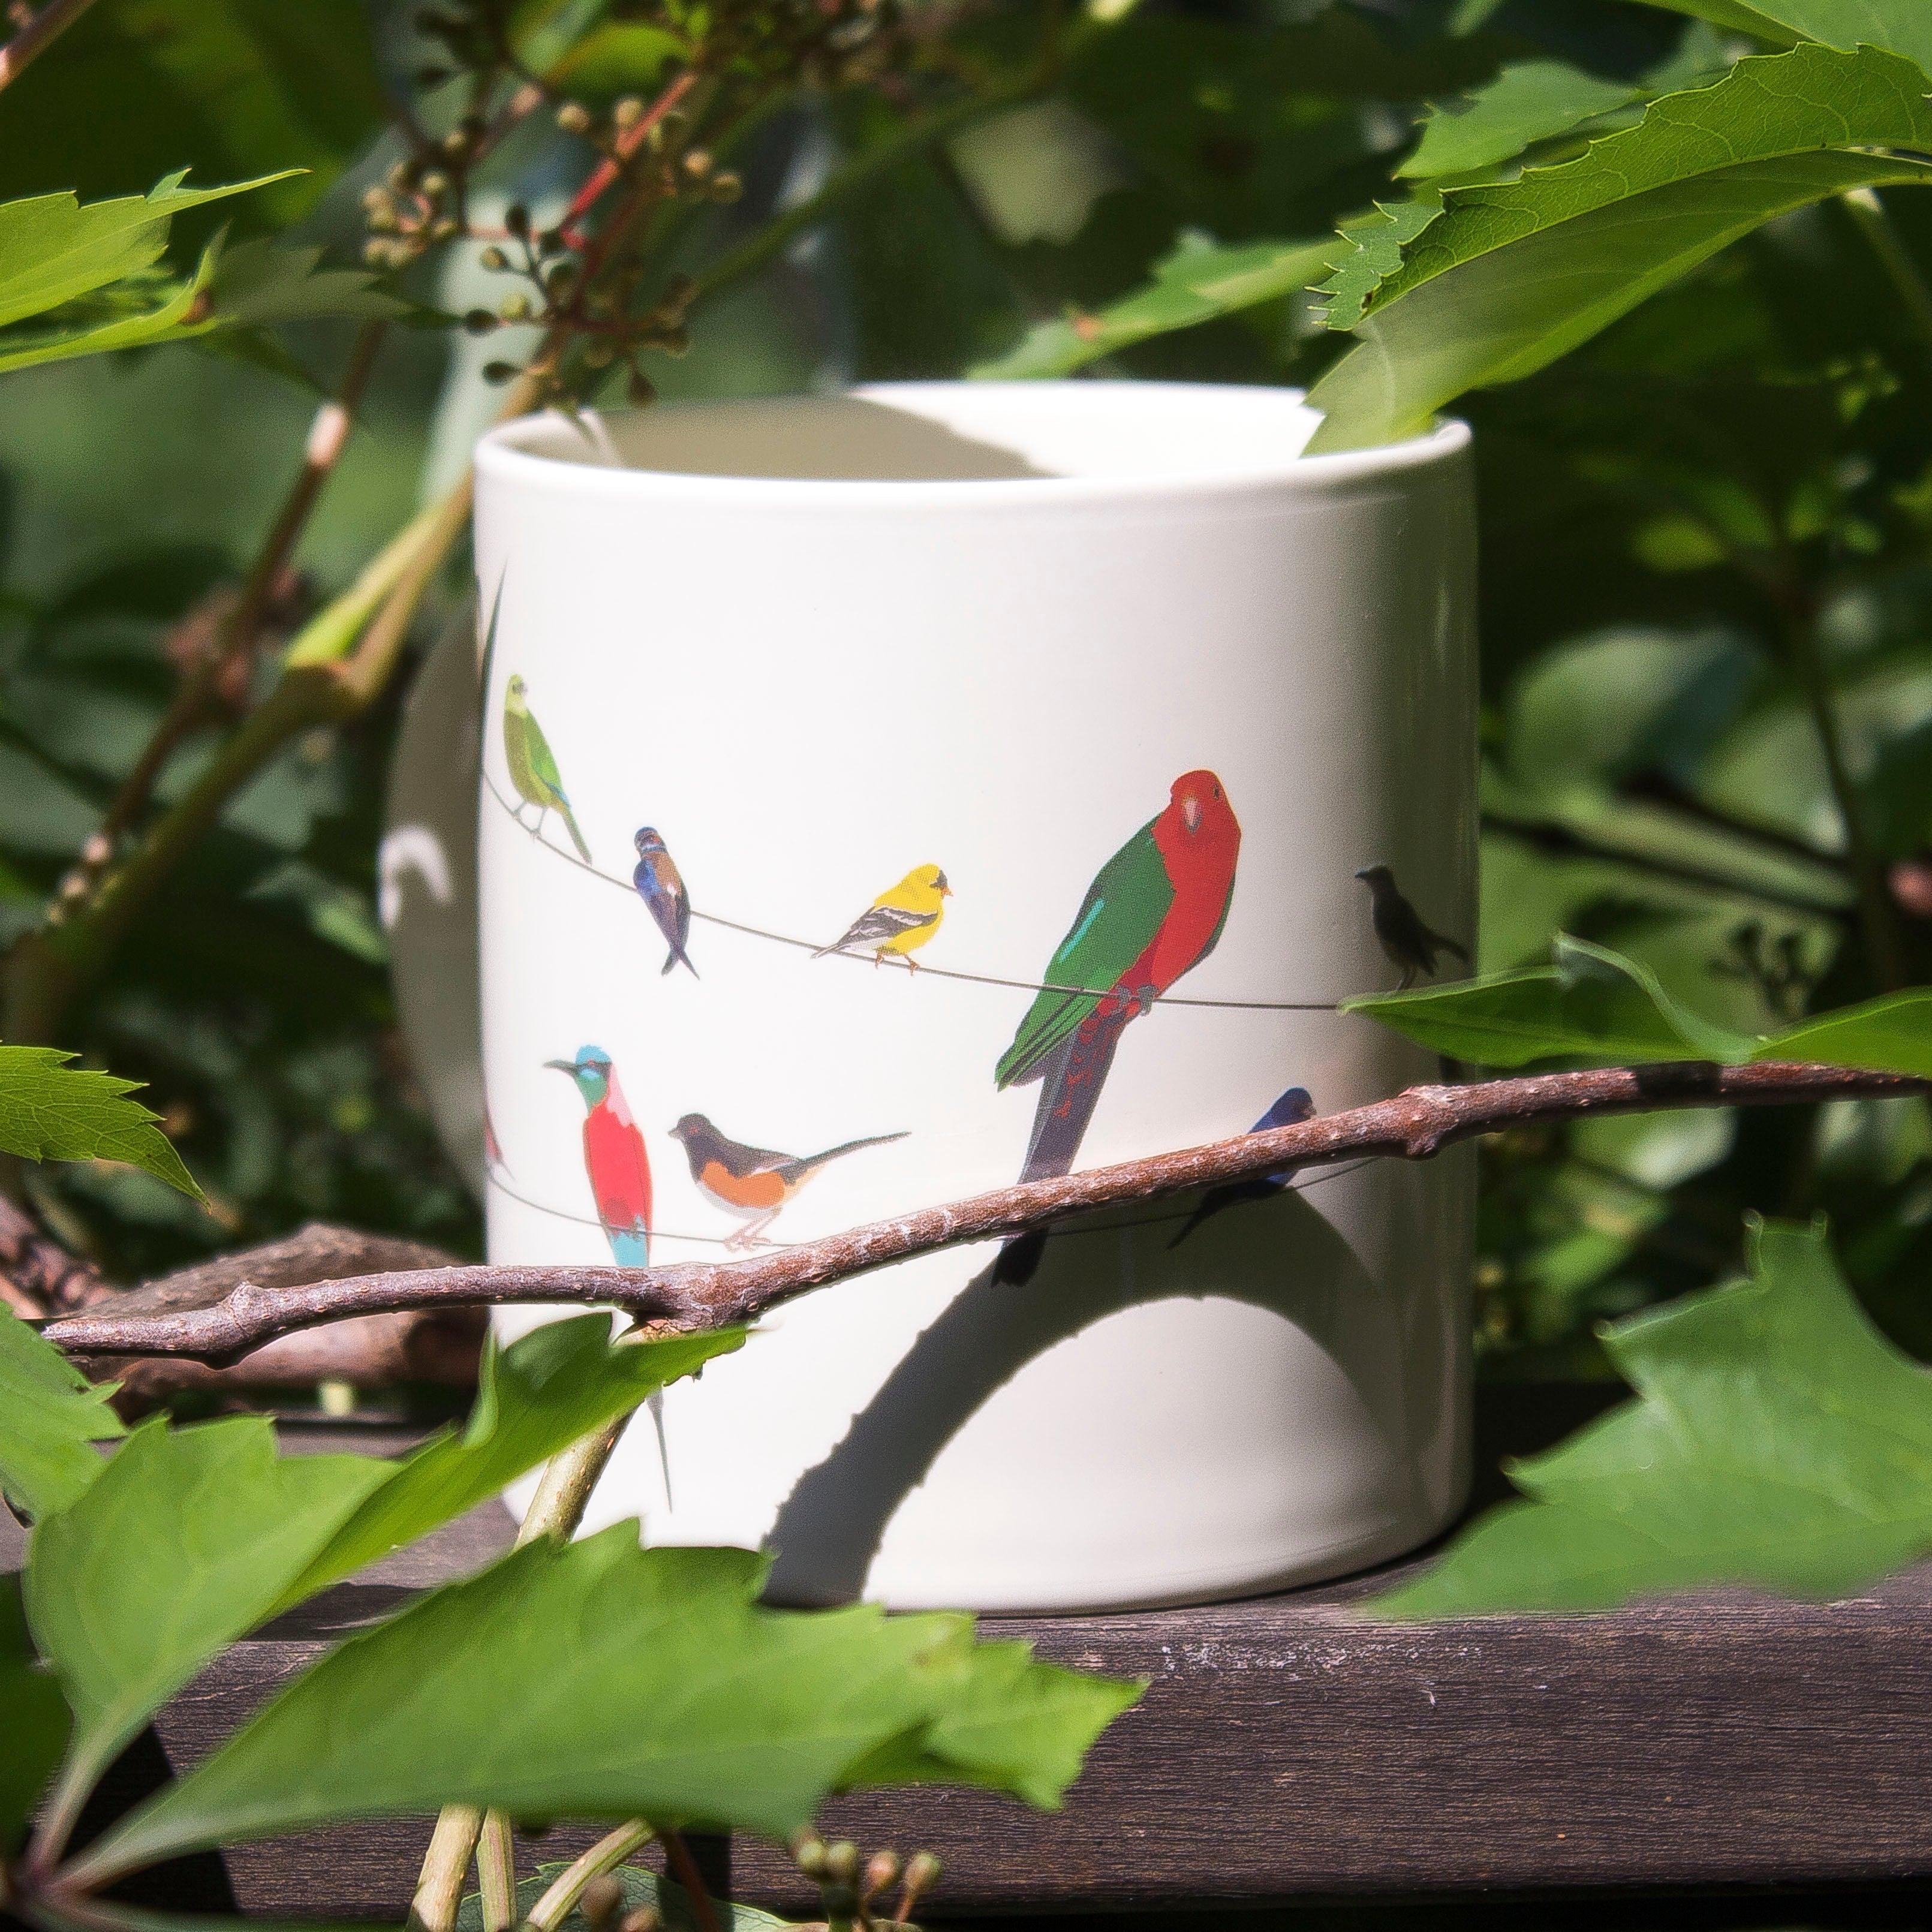 Product photo of Birds on a Wire Heat-Changing Mug, a novelty gift manufactured by The Unemployed Philosophers Guild.